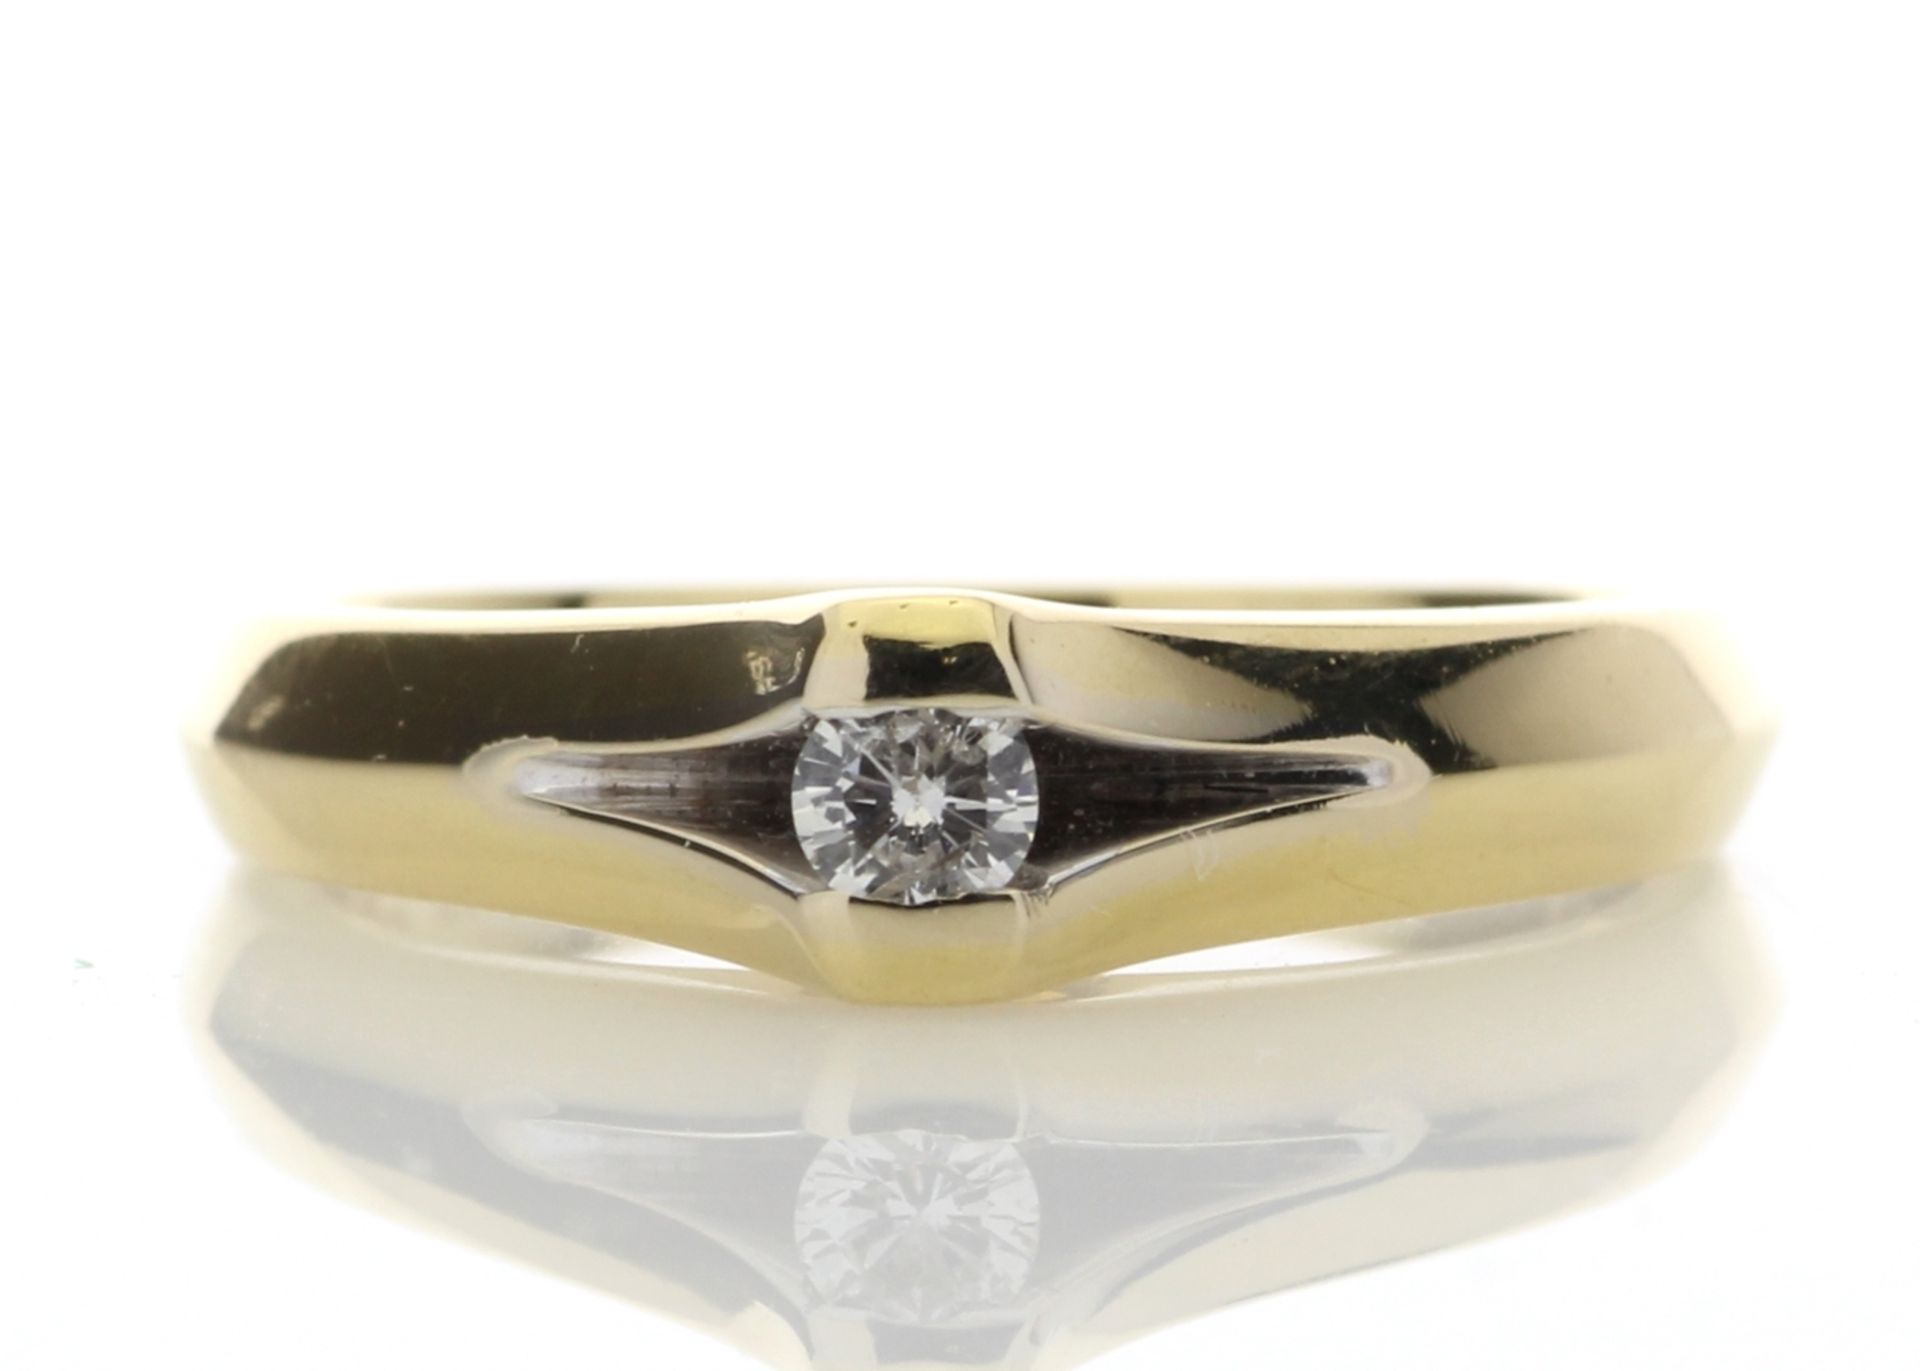 18ct Single Stone Fancy Rub Over Set Diamond Ring 0.10 Carats - Valued by GIE £9,455.00 - A